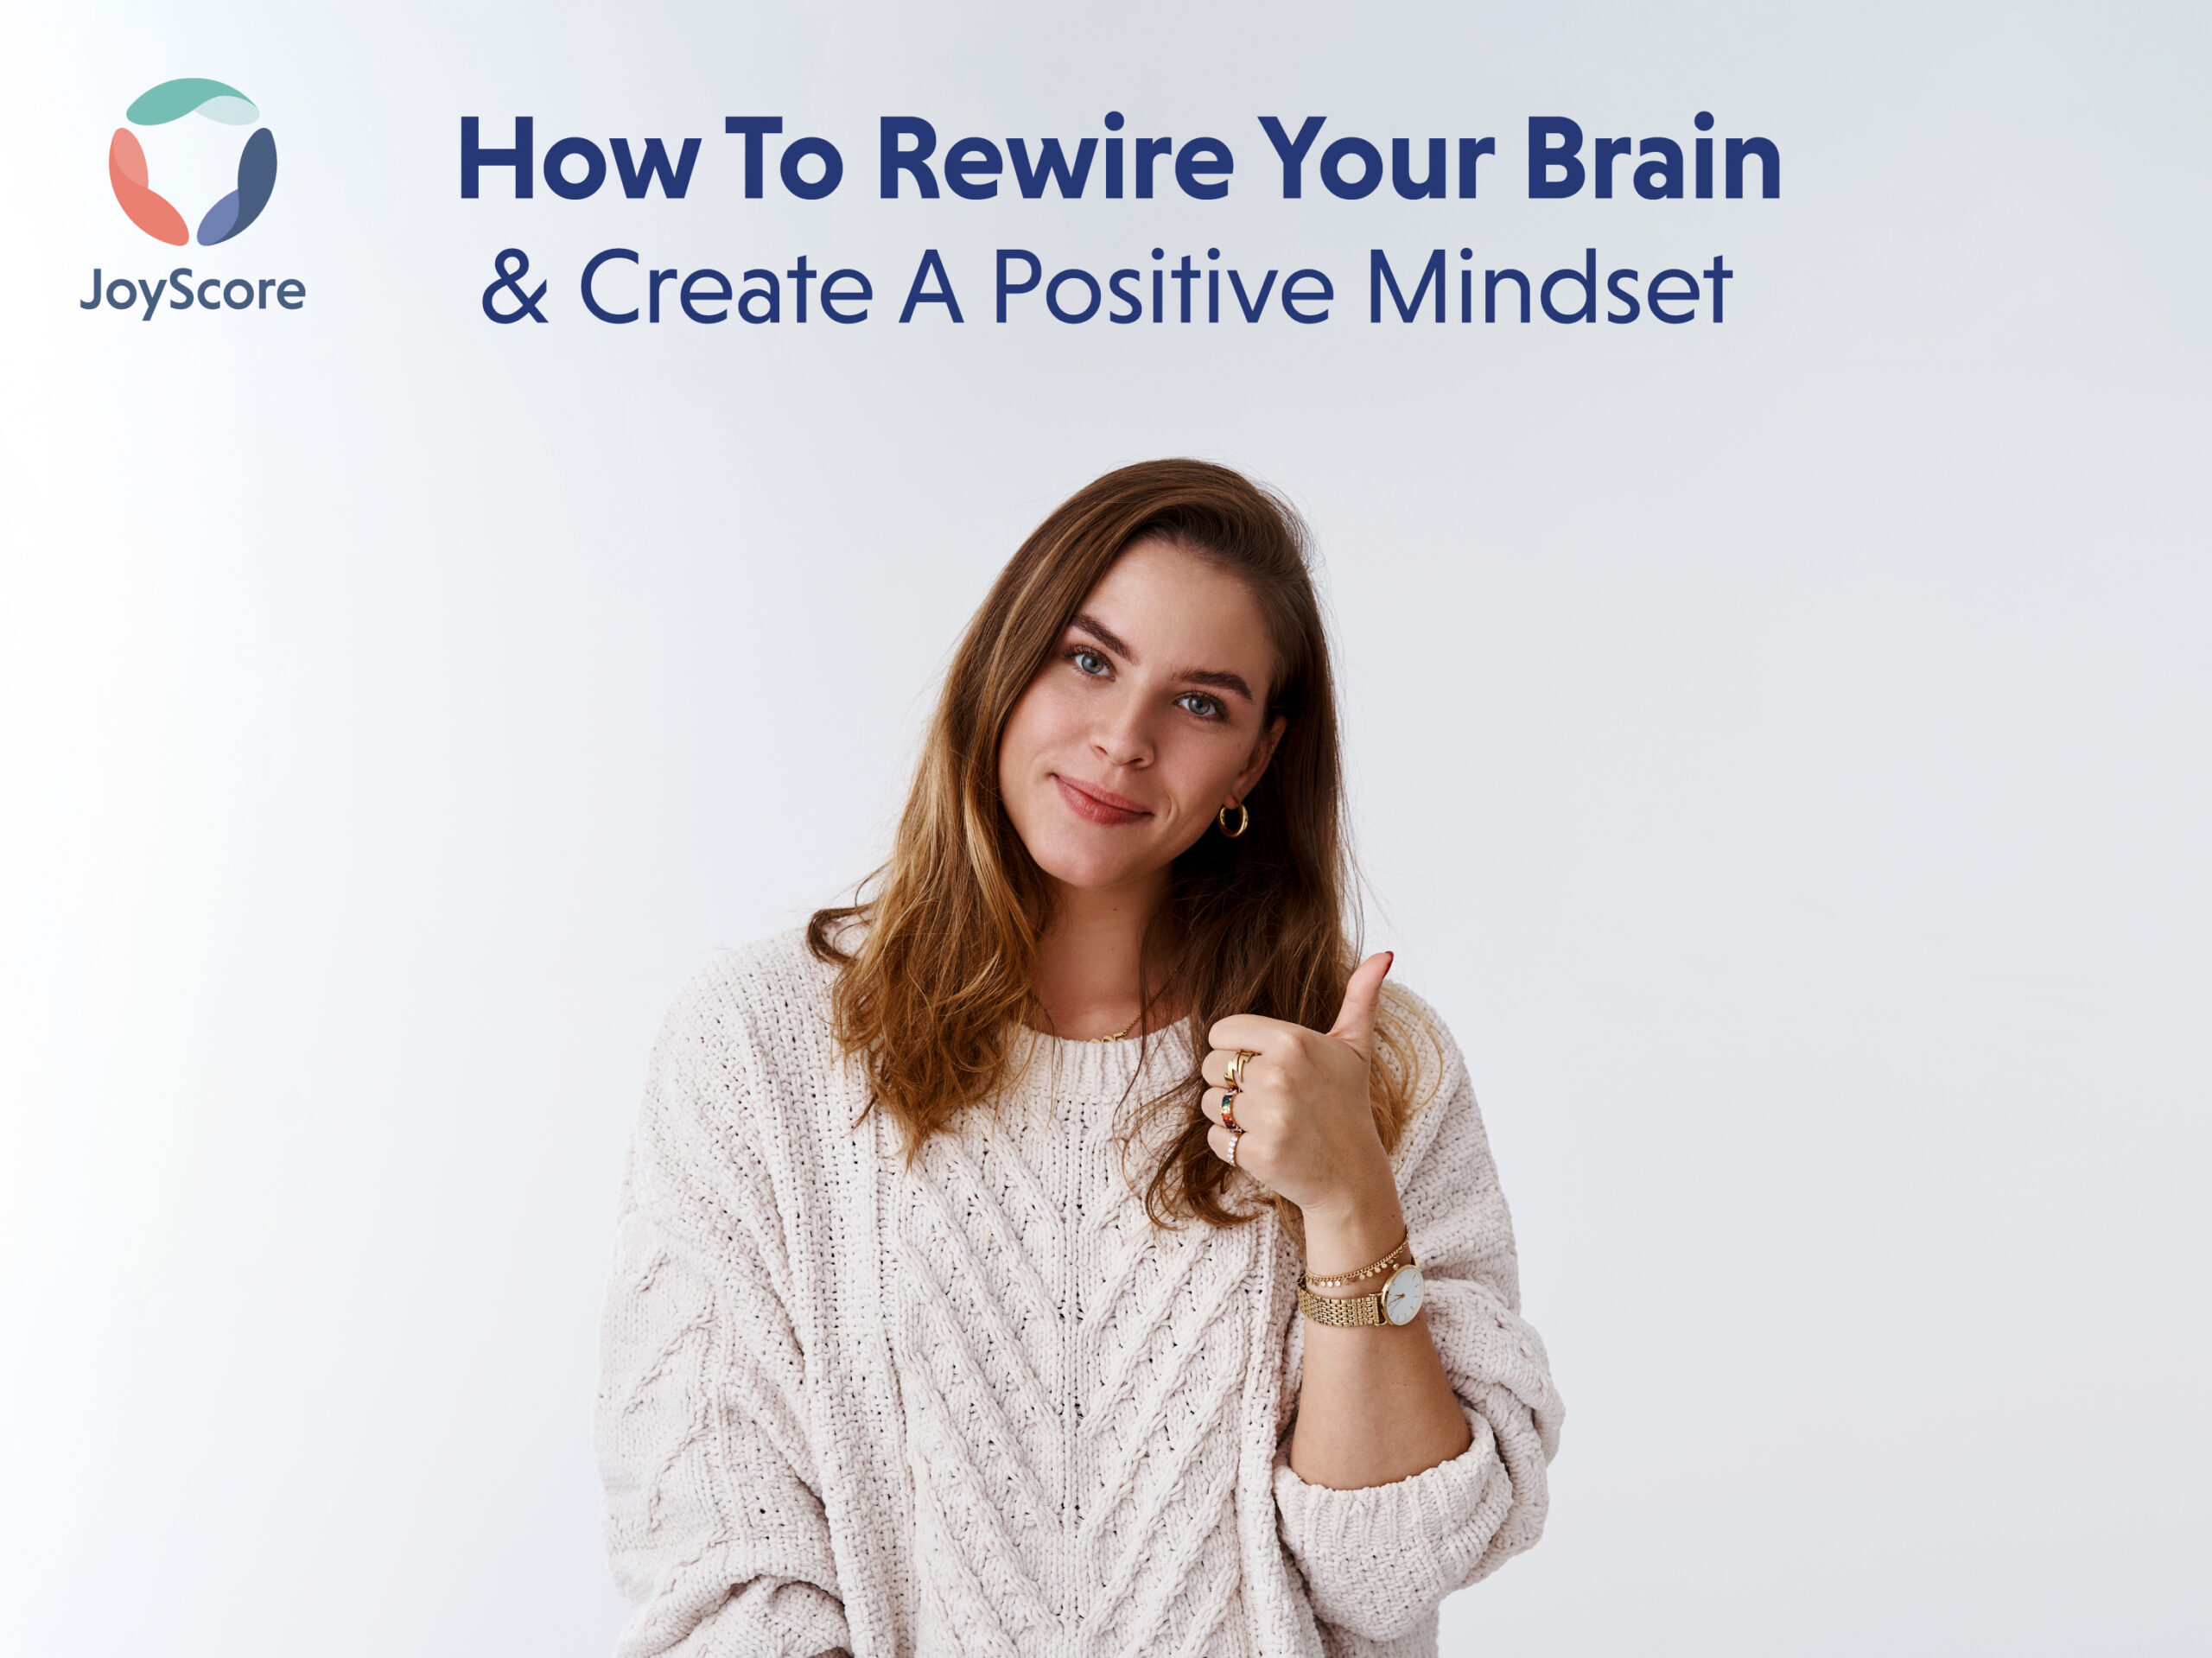 Your Mind Believes What You Tell It! How To Rewire Your Brain & Create A Positive Mindset